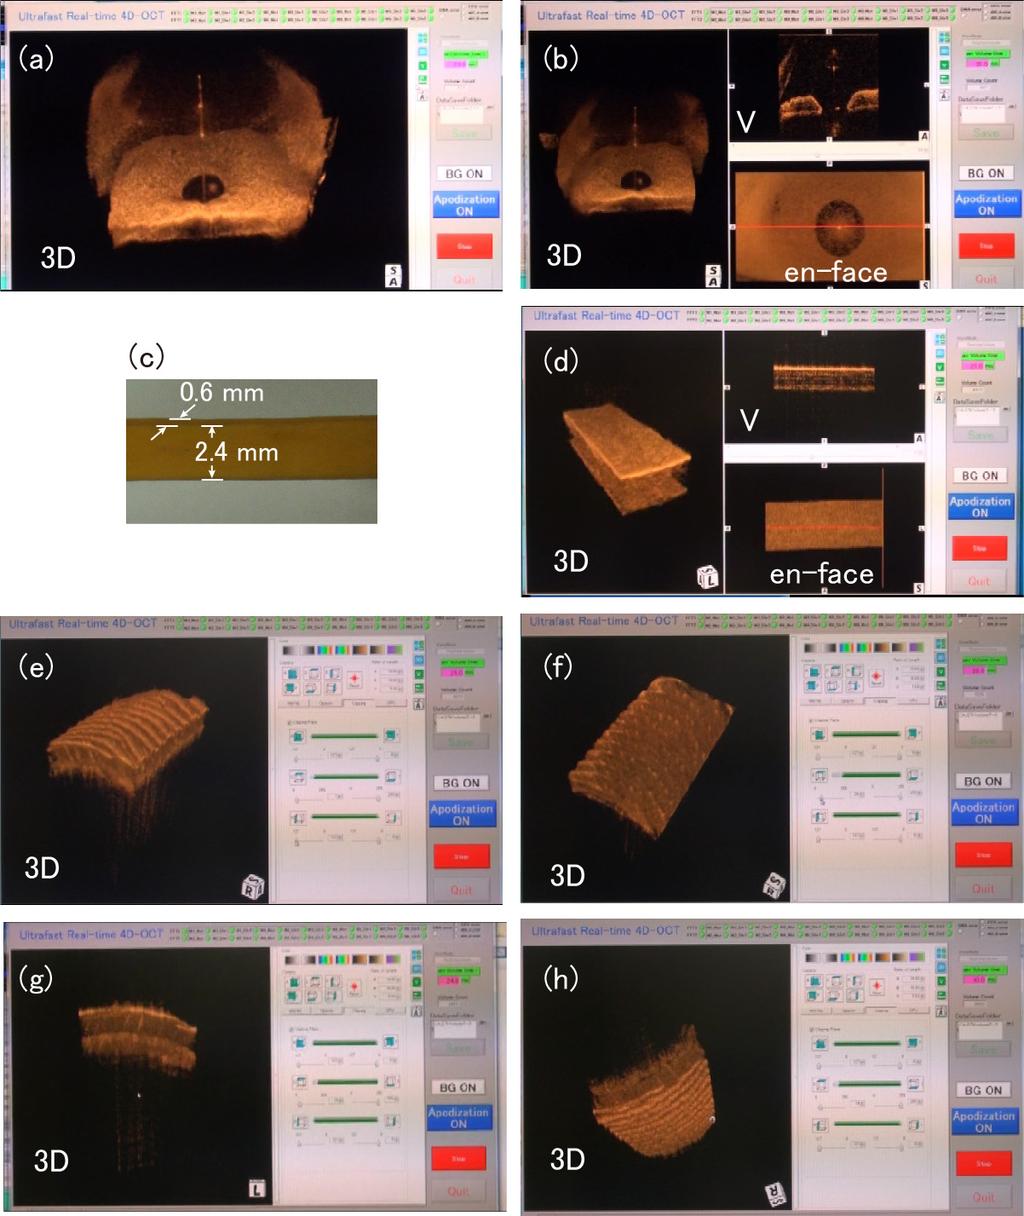 Fig. 12. Representative frames of videos of 4D real-time OCT display.